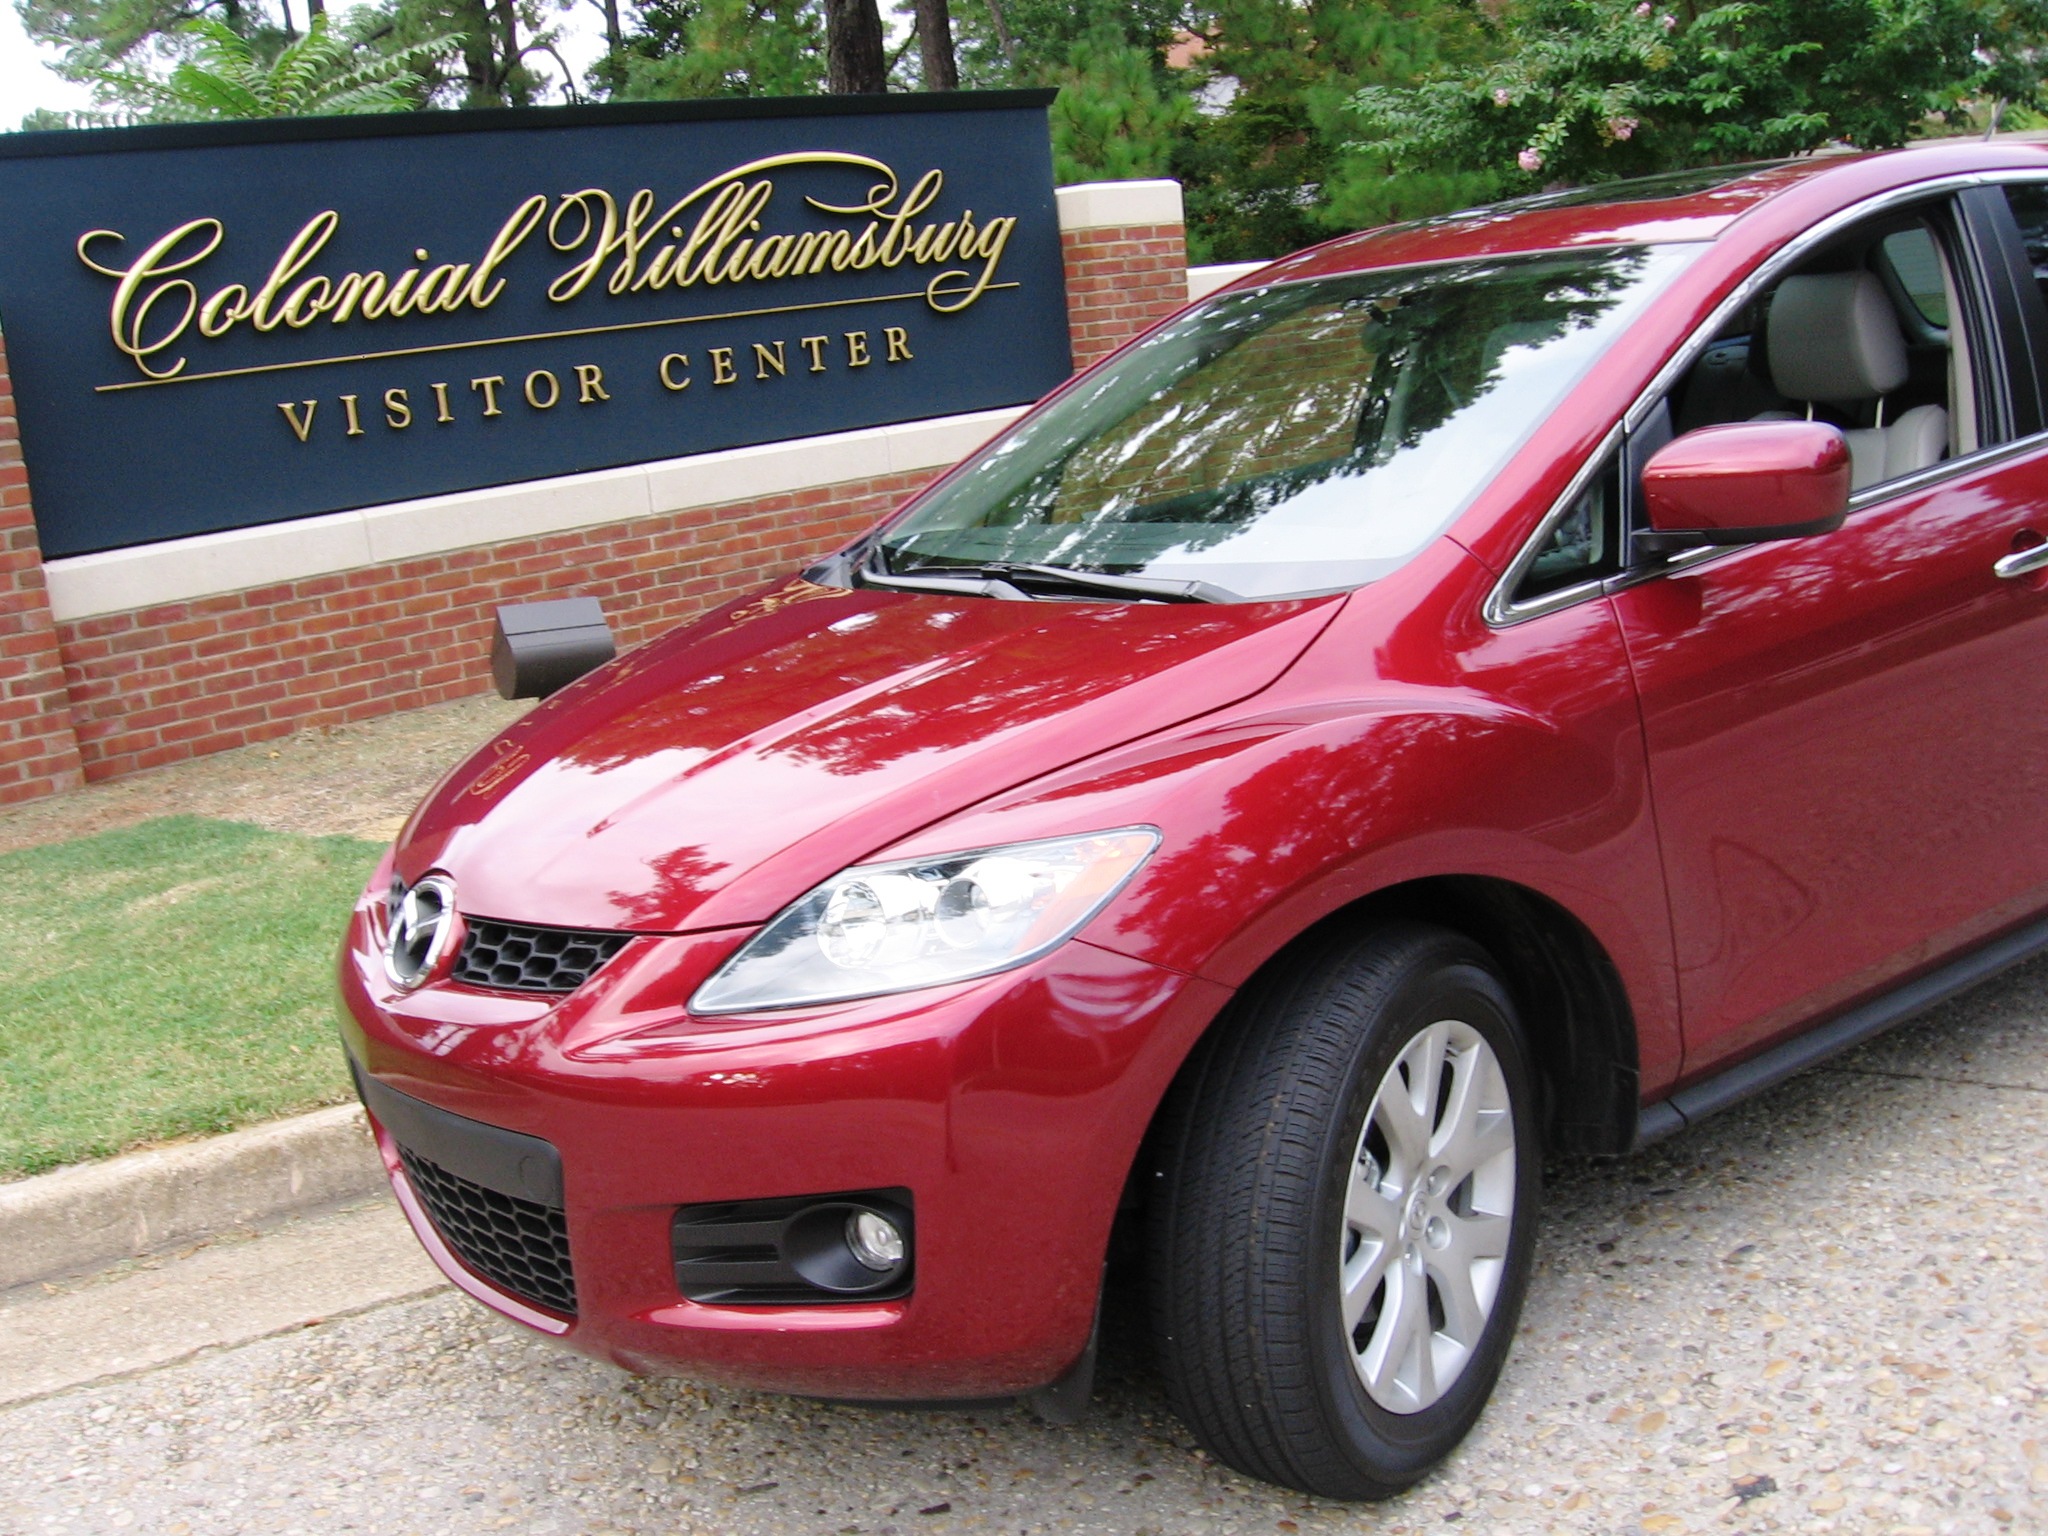 08 Mazda Cx 7 Review Along The Colonial Trail Video Enhanced